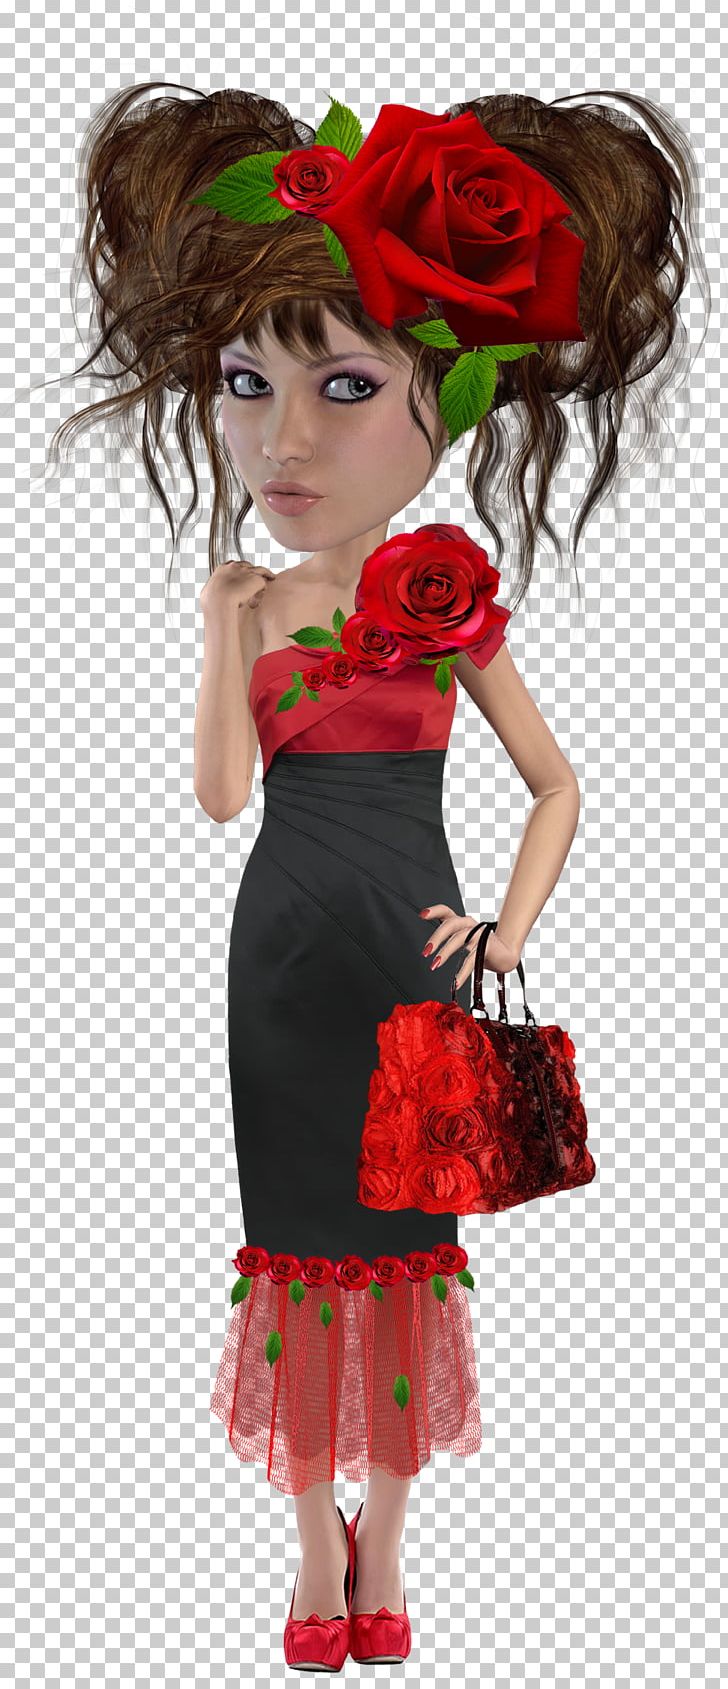 Cocktail Dress Dance Costume PNG, Clipart, Clothing, Cocktail, Cocktail Dress, Costume, Dance Free PNG Download